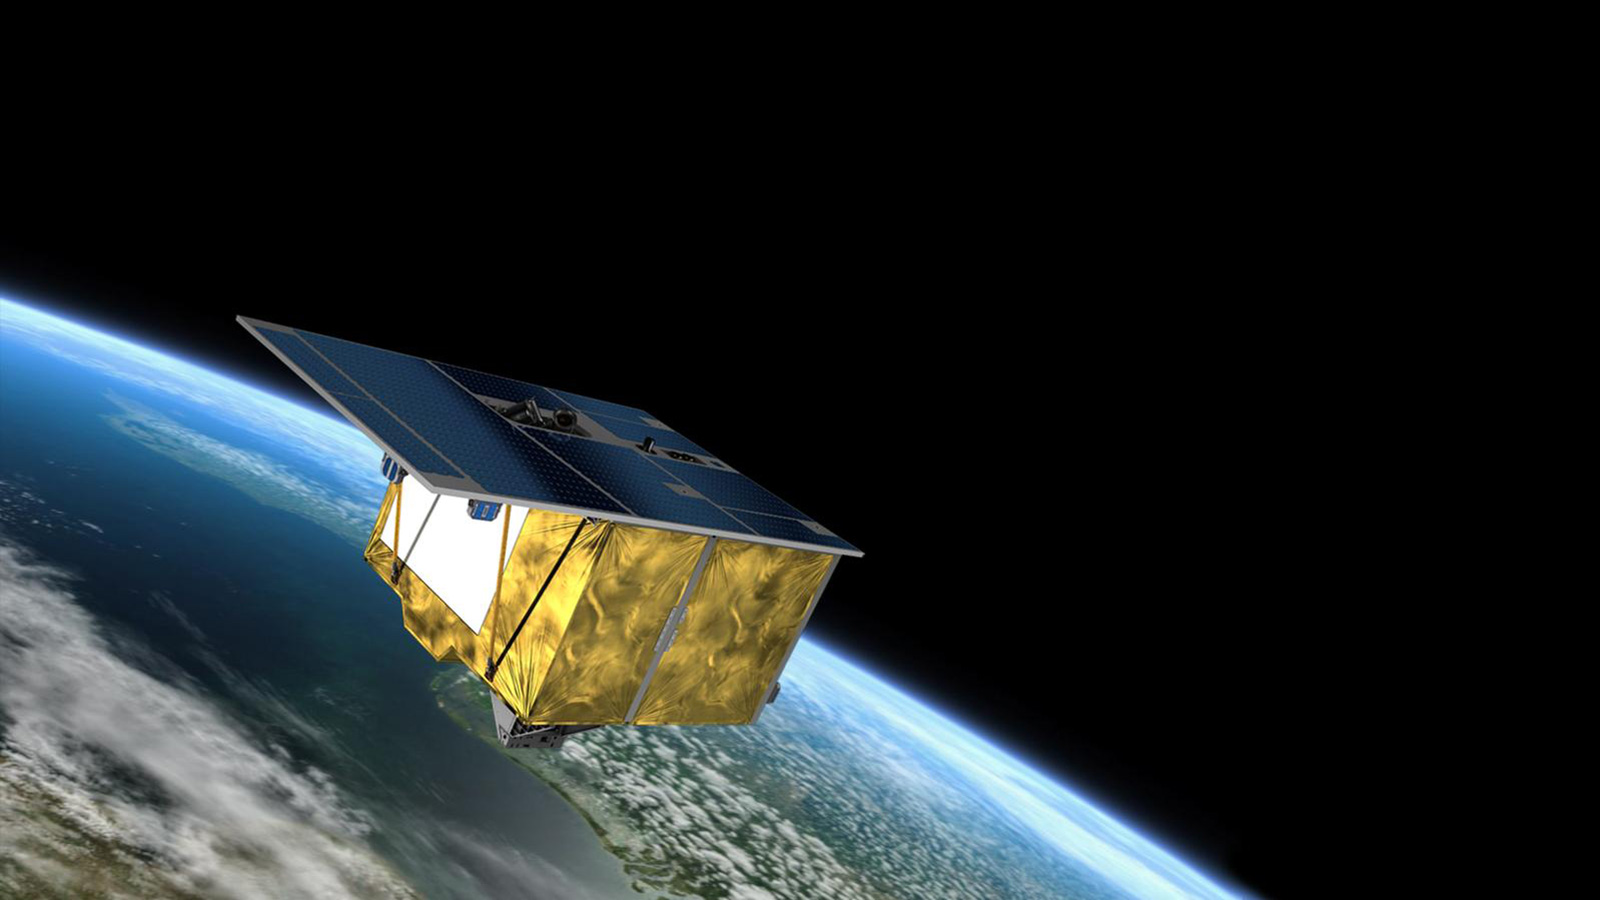 Scientists Call New Satellite ‘Game Changer’ For Tracking Environmental Changes